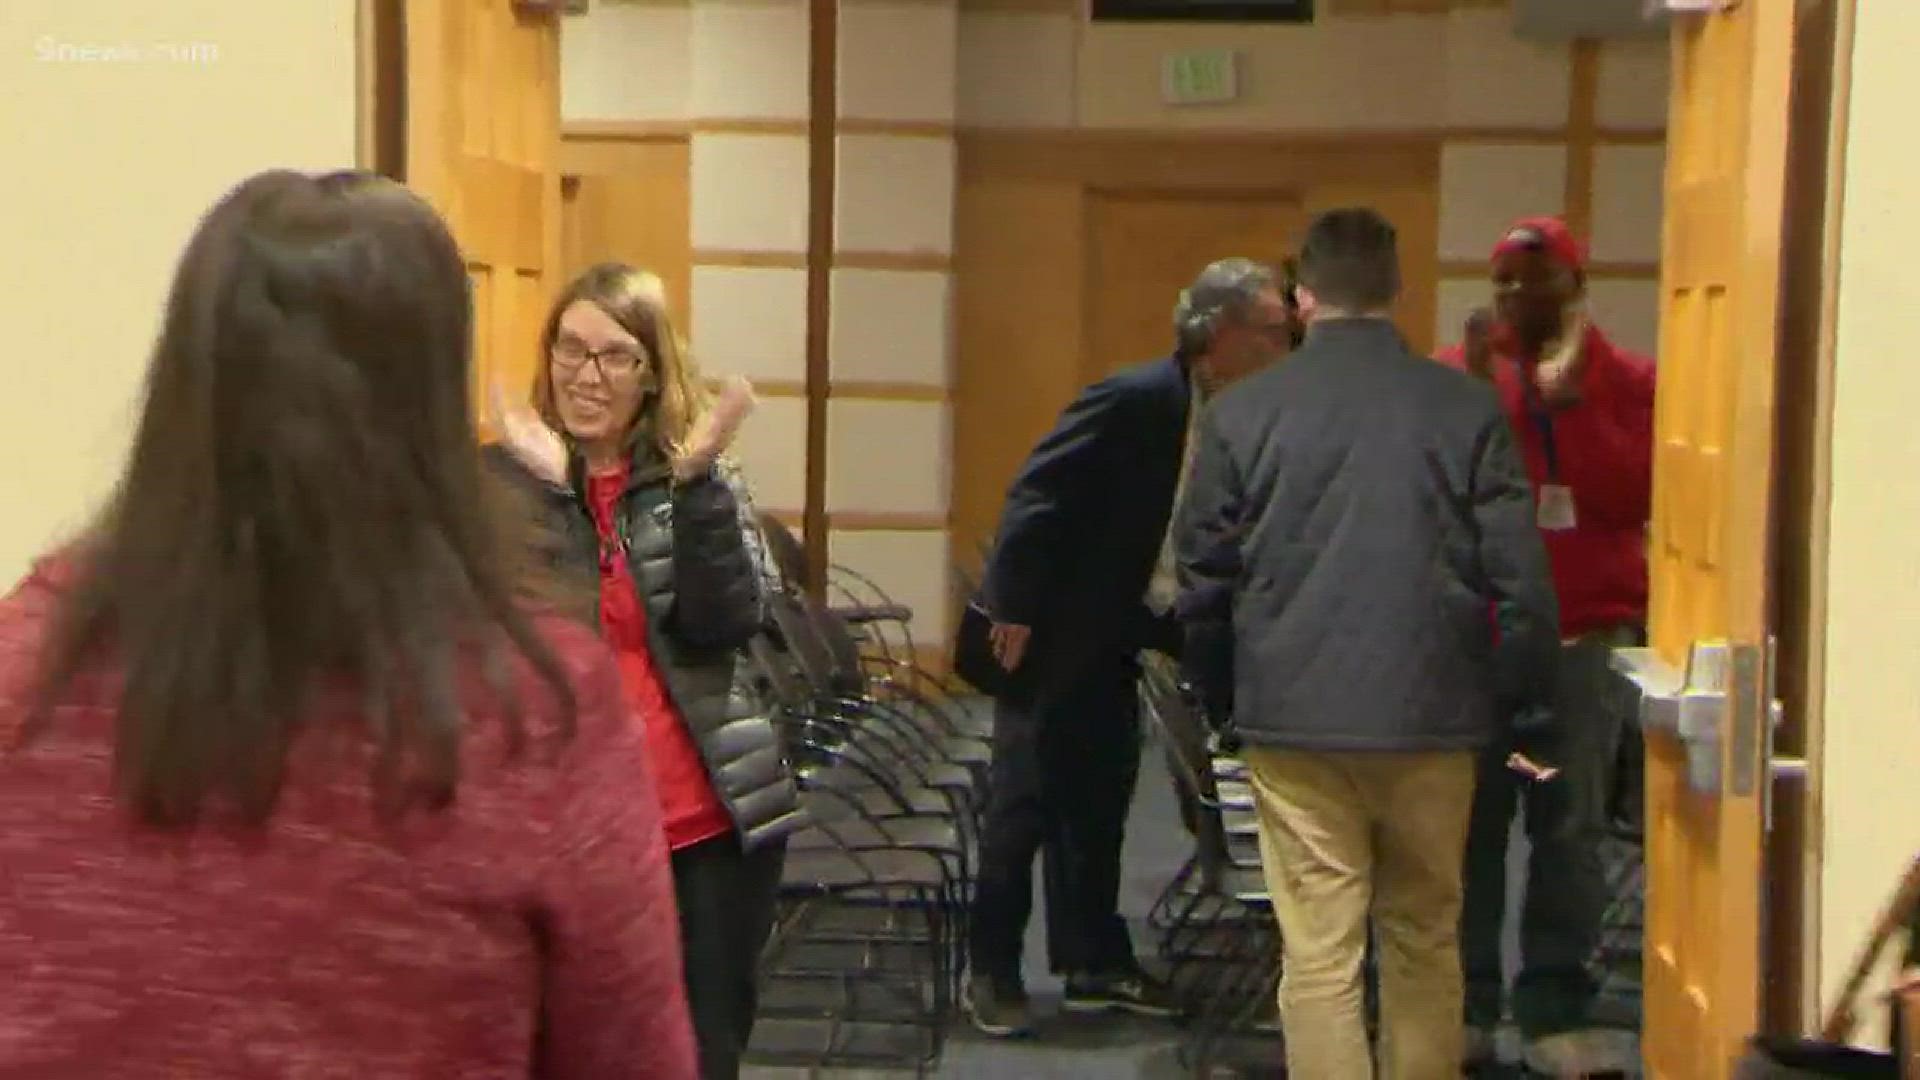 The union bargaining team and the district reached an agreement early Thursday morning. It still needs to be ratified by the full union and then approved by the Denver Board of Education.